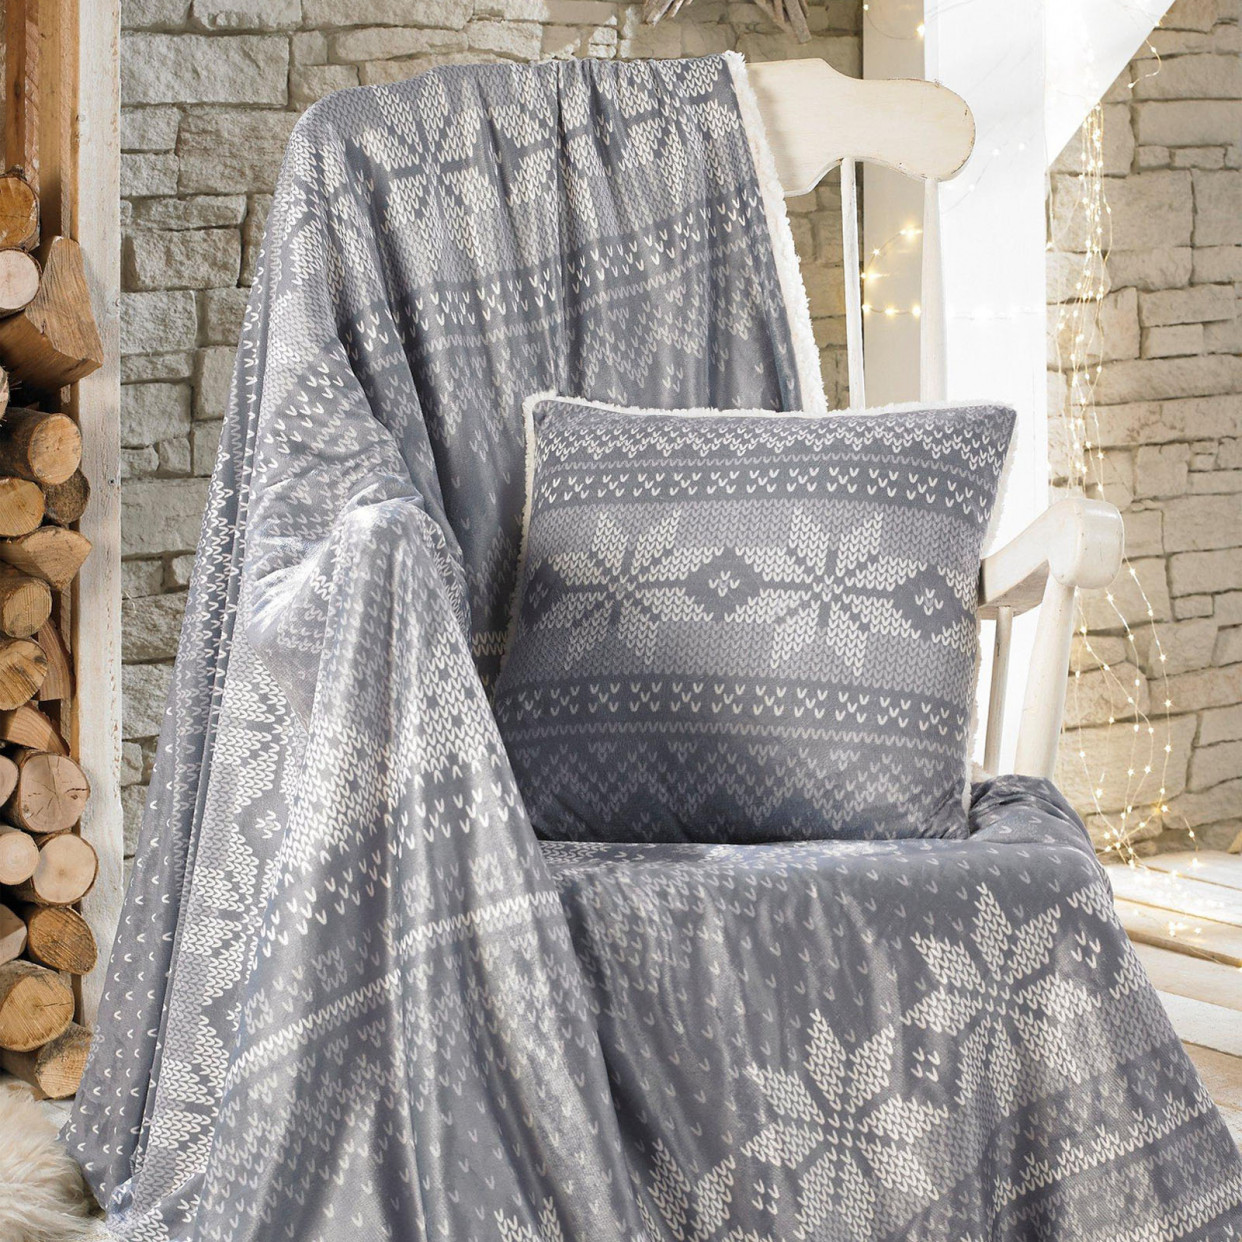 Nordic Fleece Throw Over Blanket Bed Sherpa, Grey and White - 150 x 200cm>